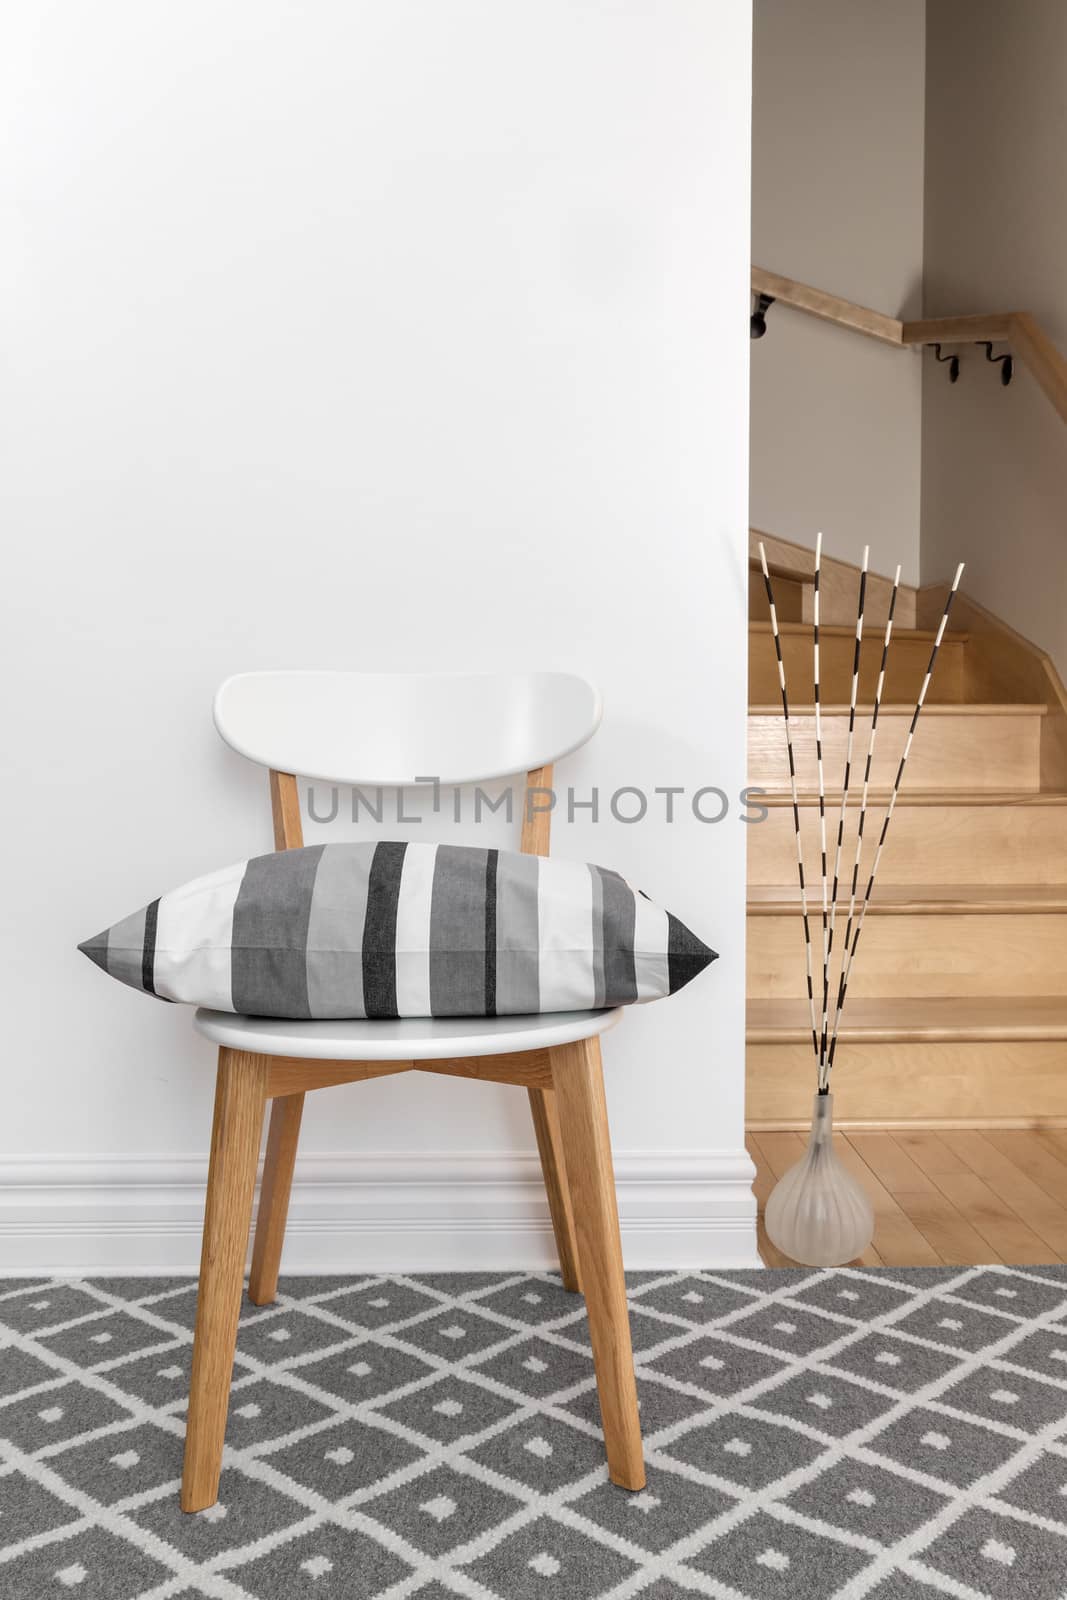 Chair with cushion in a room with staircase by anikasalsera